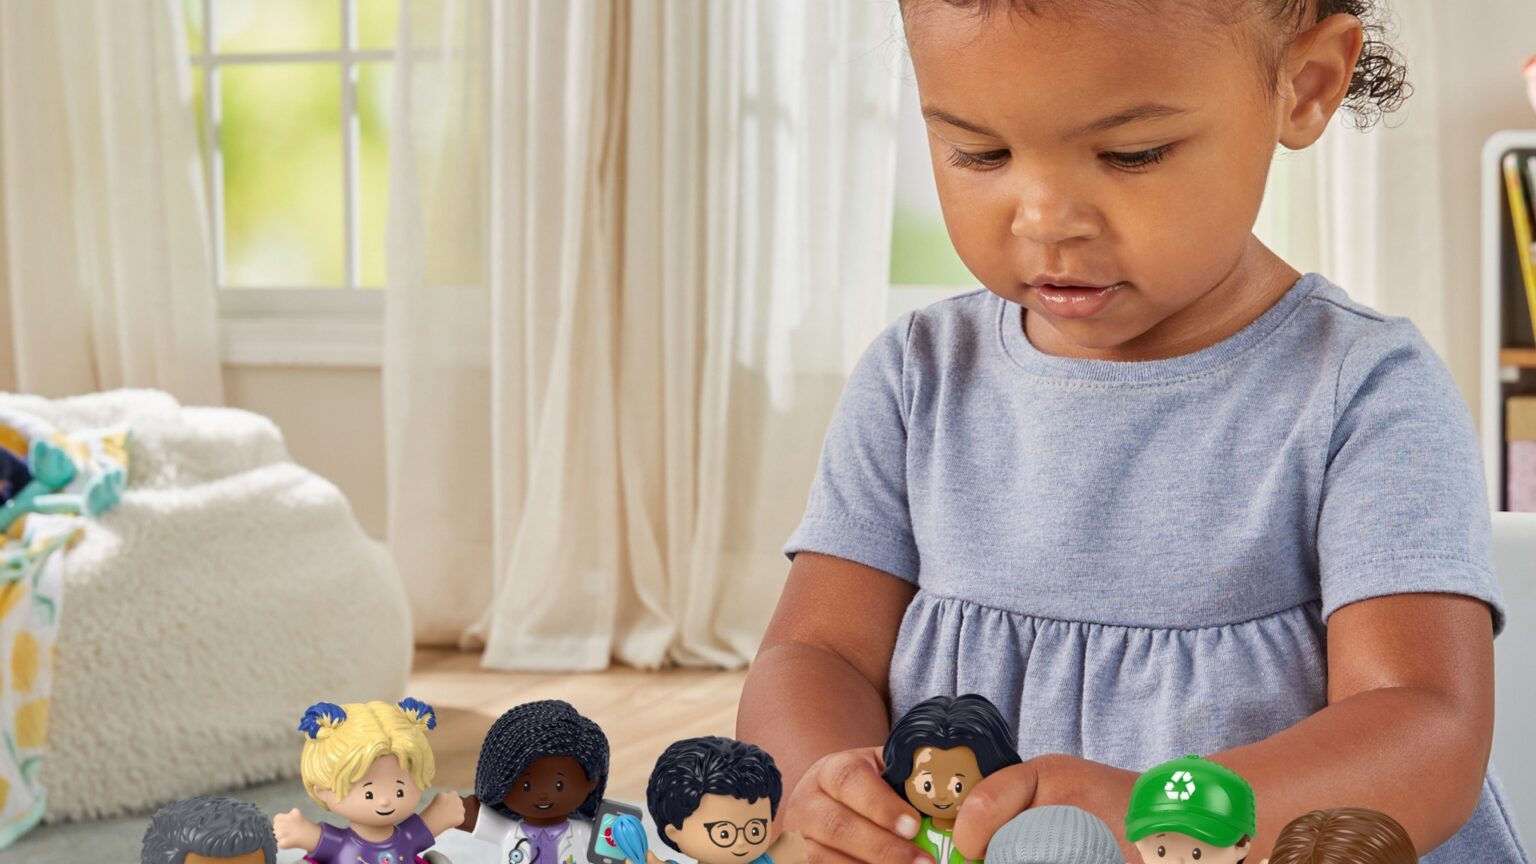 Top toymaker Fisher-Price unveils new line of dolls just in time for Christmas